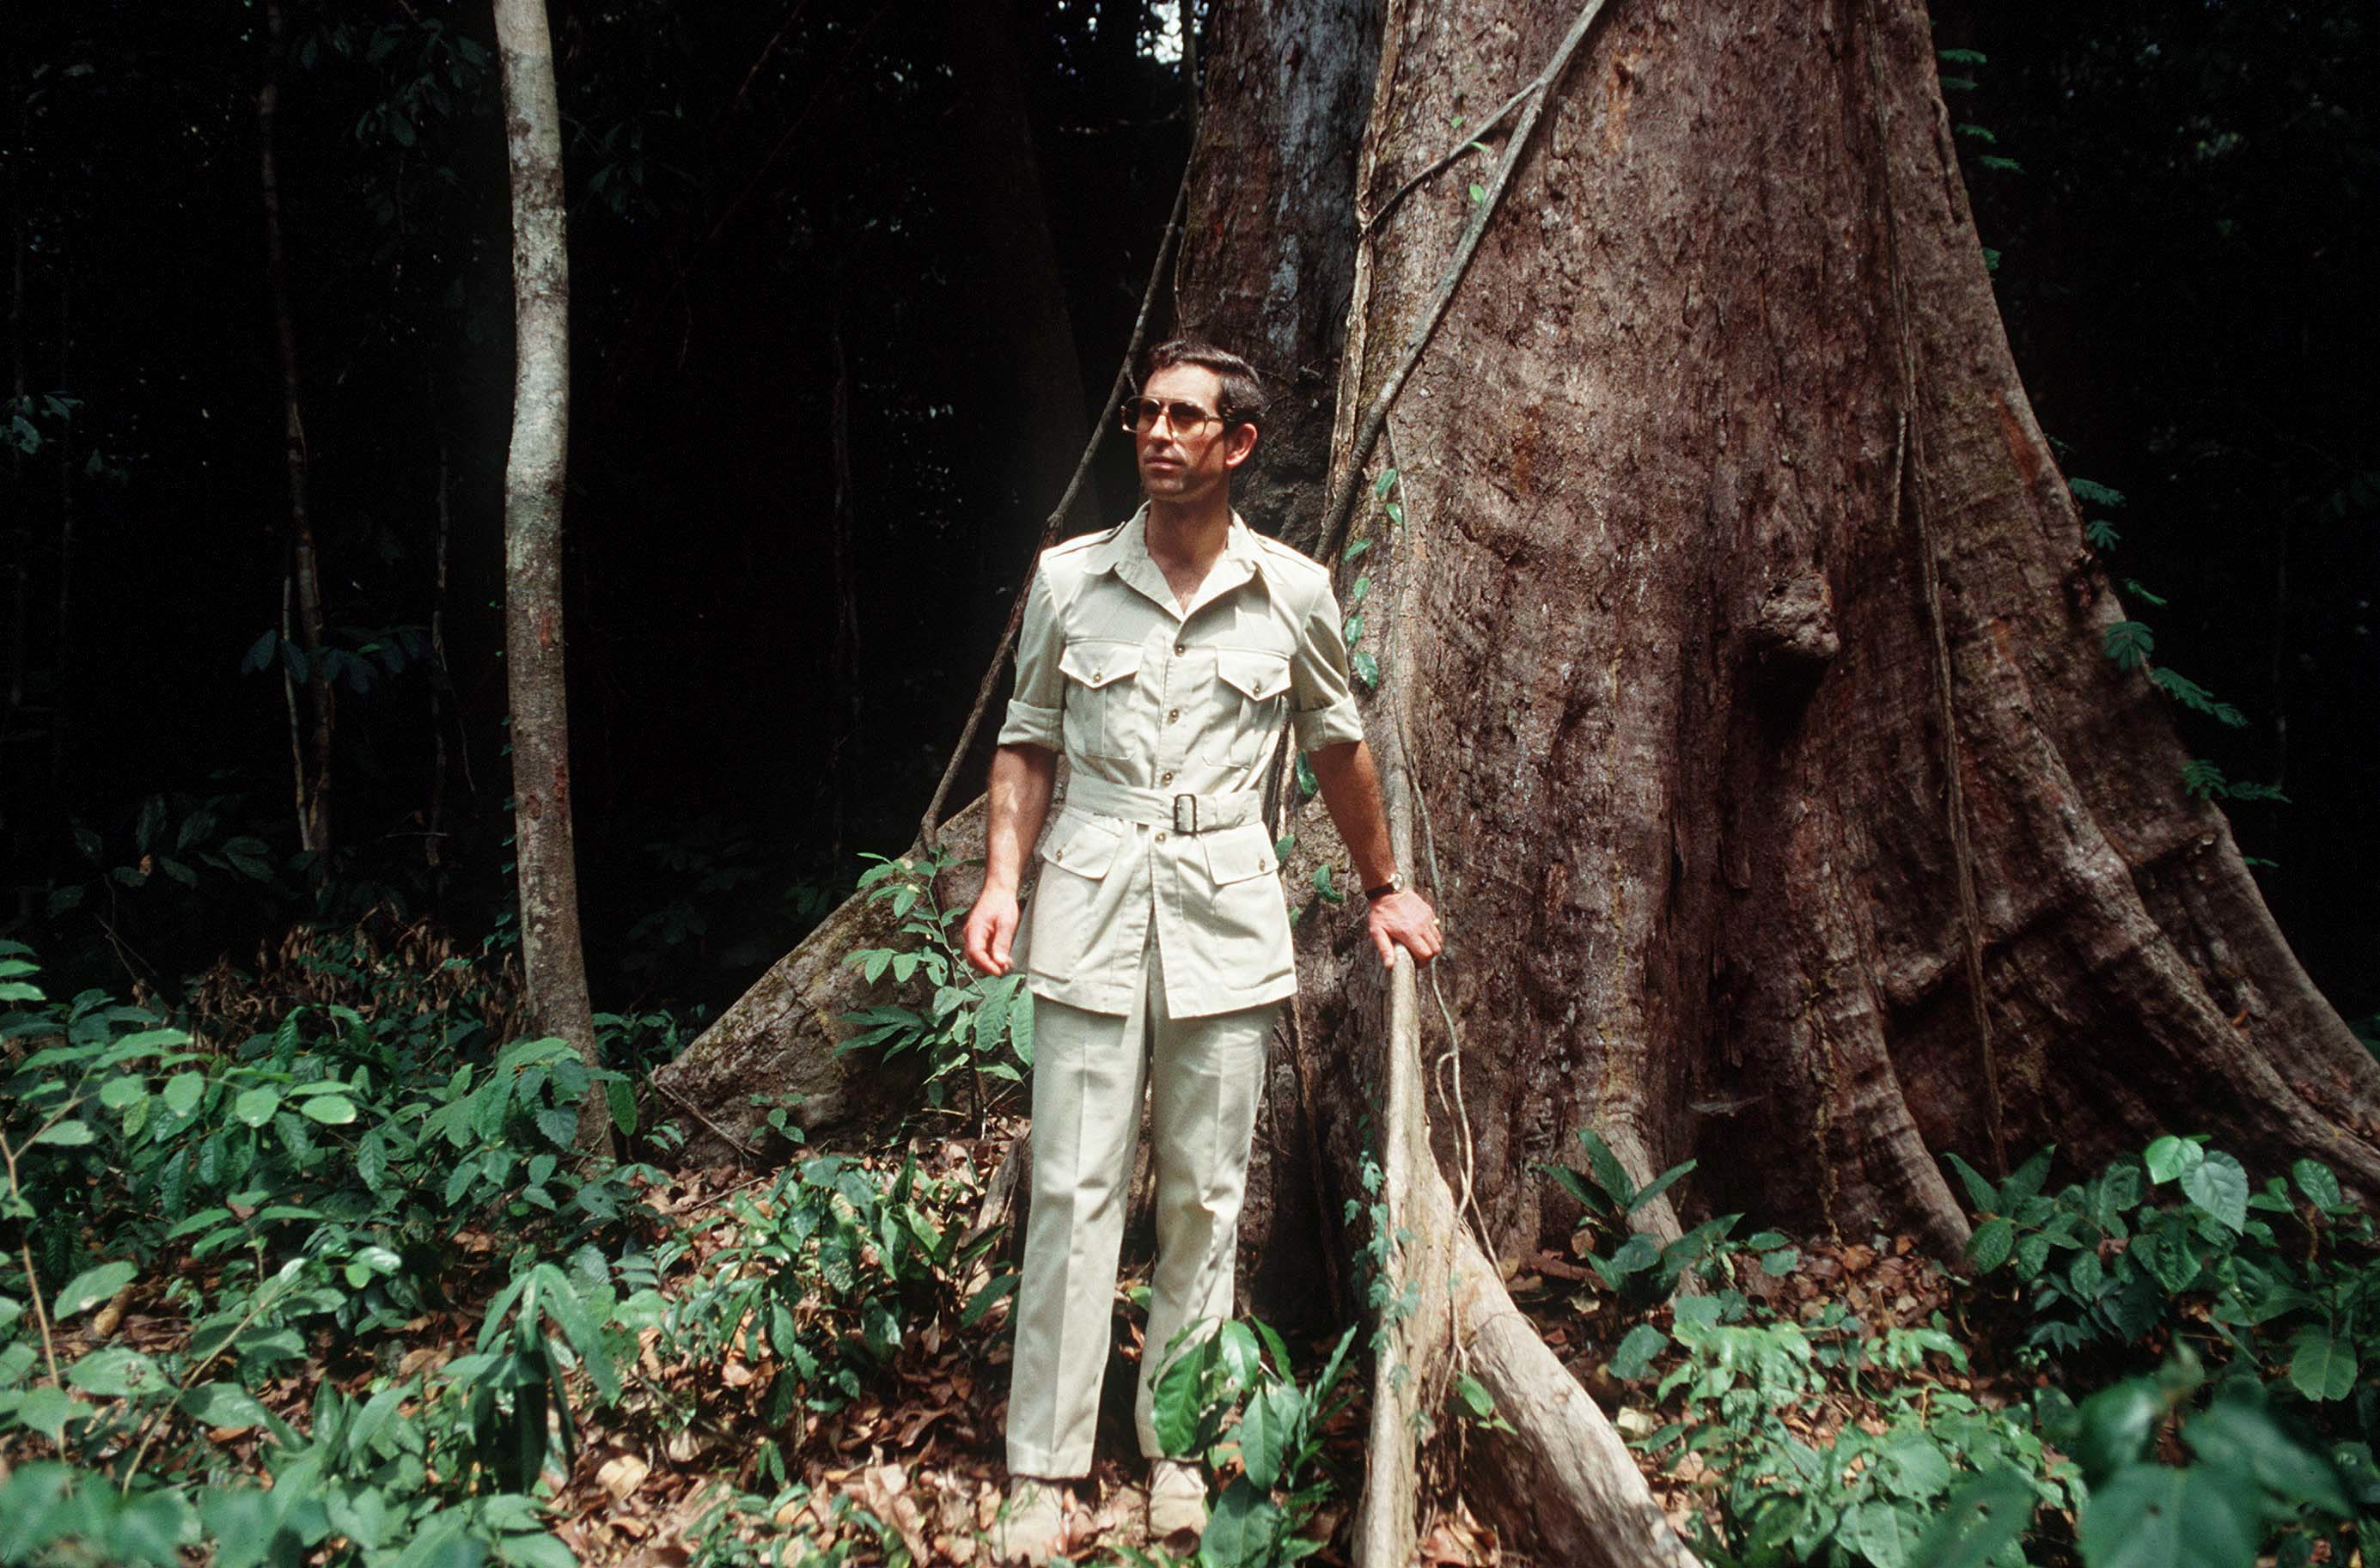 Prince Charles visiting a rainforest in Cameroon to raise awareness of deforestation in 1990 (Tim Graham - Getty Images)